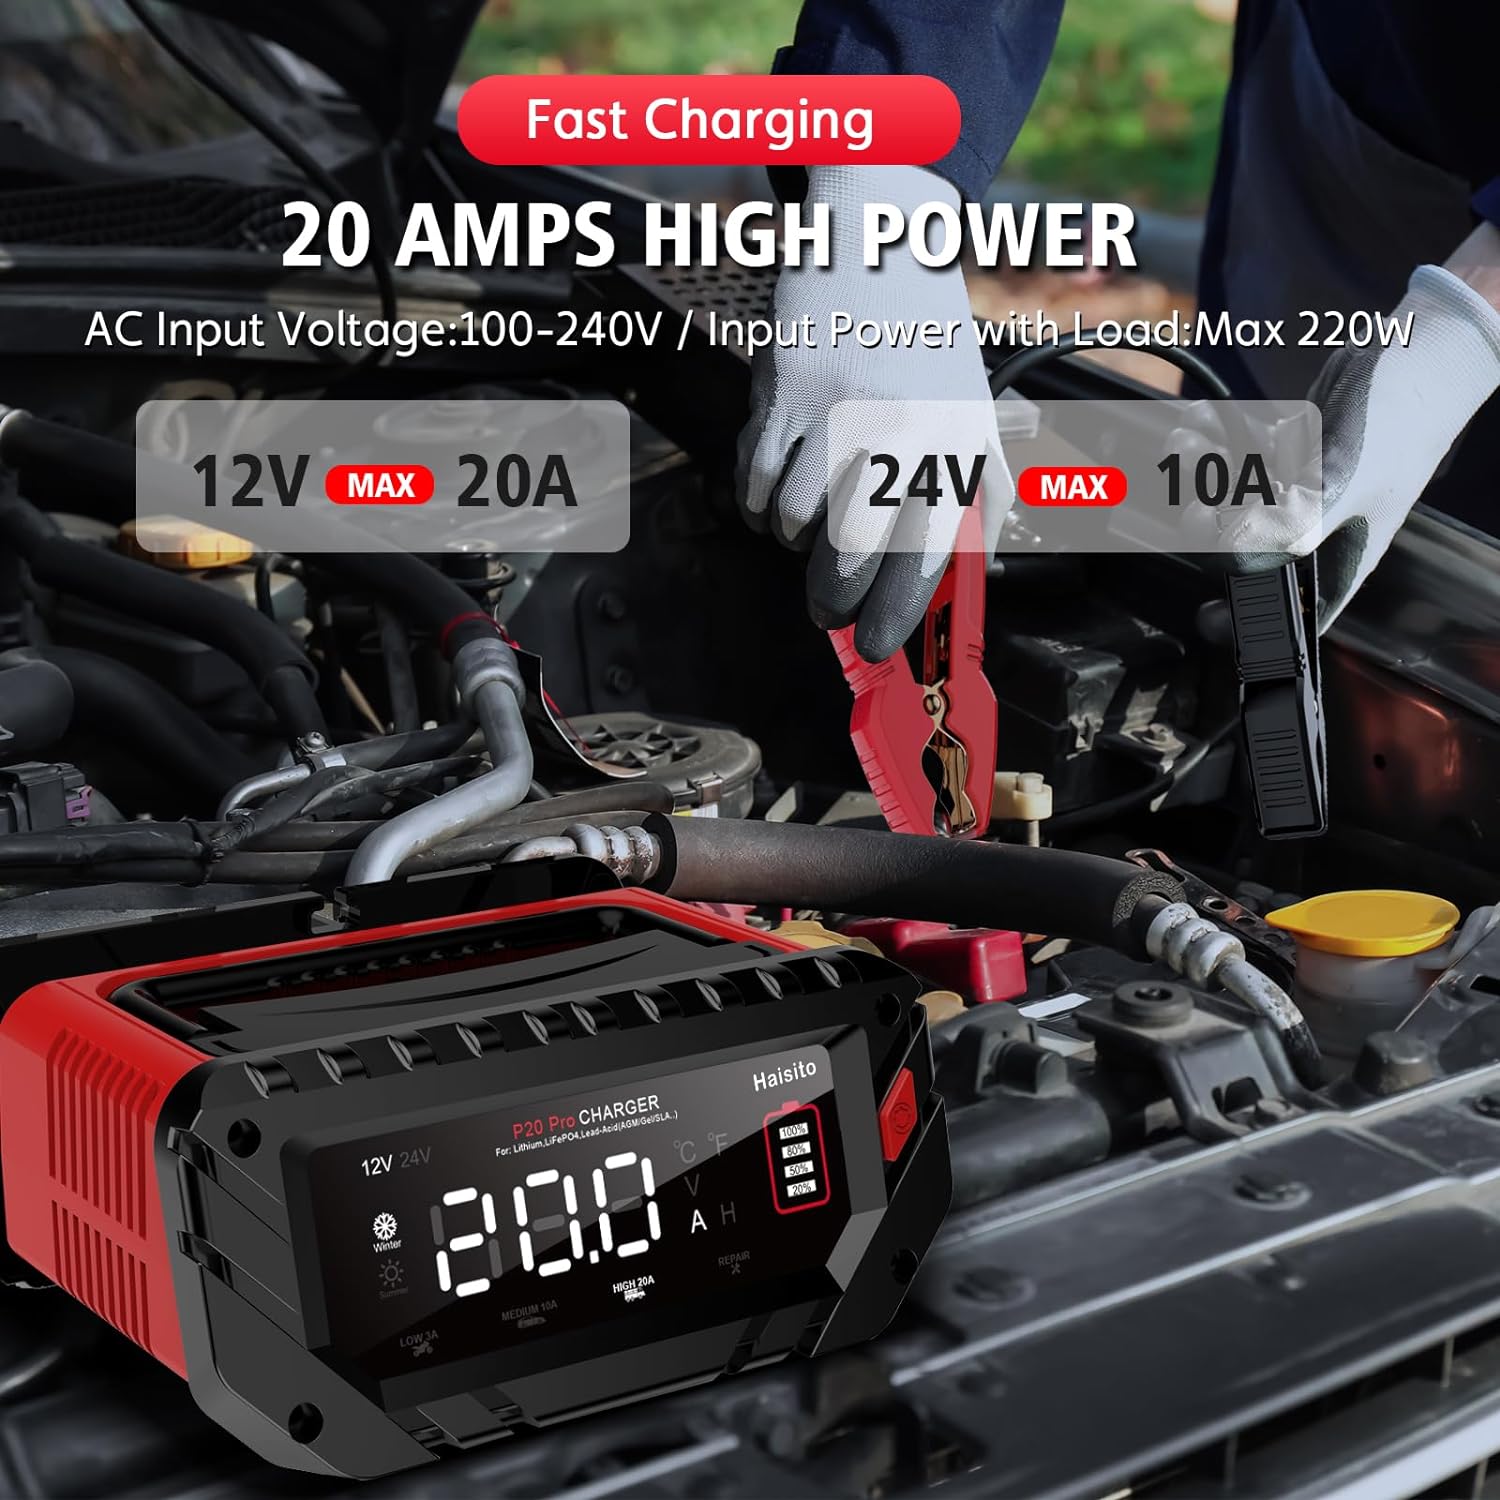 20 Amp Lithium Battery Charger, 12V and 24V Lifepo4,Lead-Acid(AGM/Gel/SLA..) Portable Car Battery Charger,Battery Maintainer, Trickle Charger, and Battery Desulfator for Car,Boat,Motorcycle… - 20 Amp Lithium Battery Charger Review